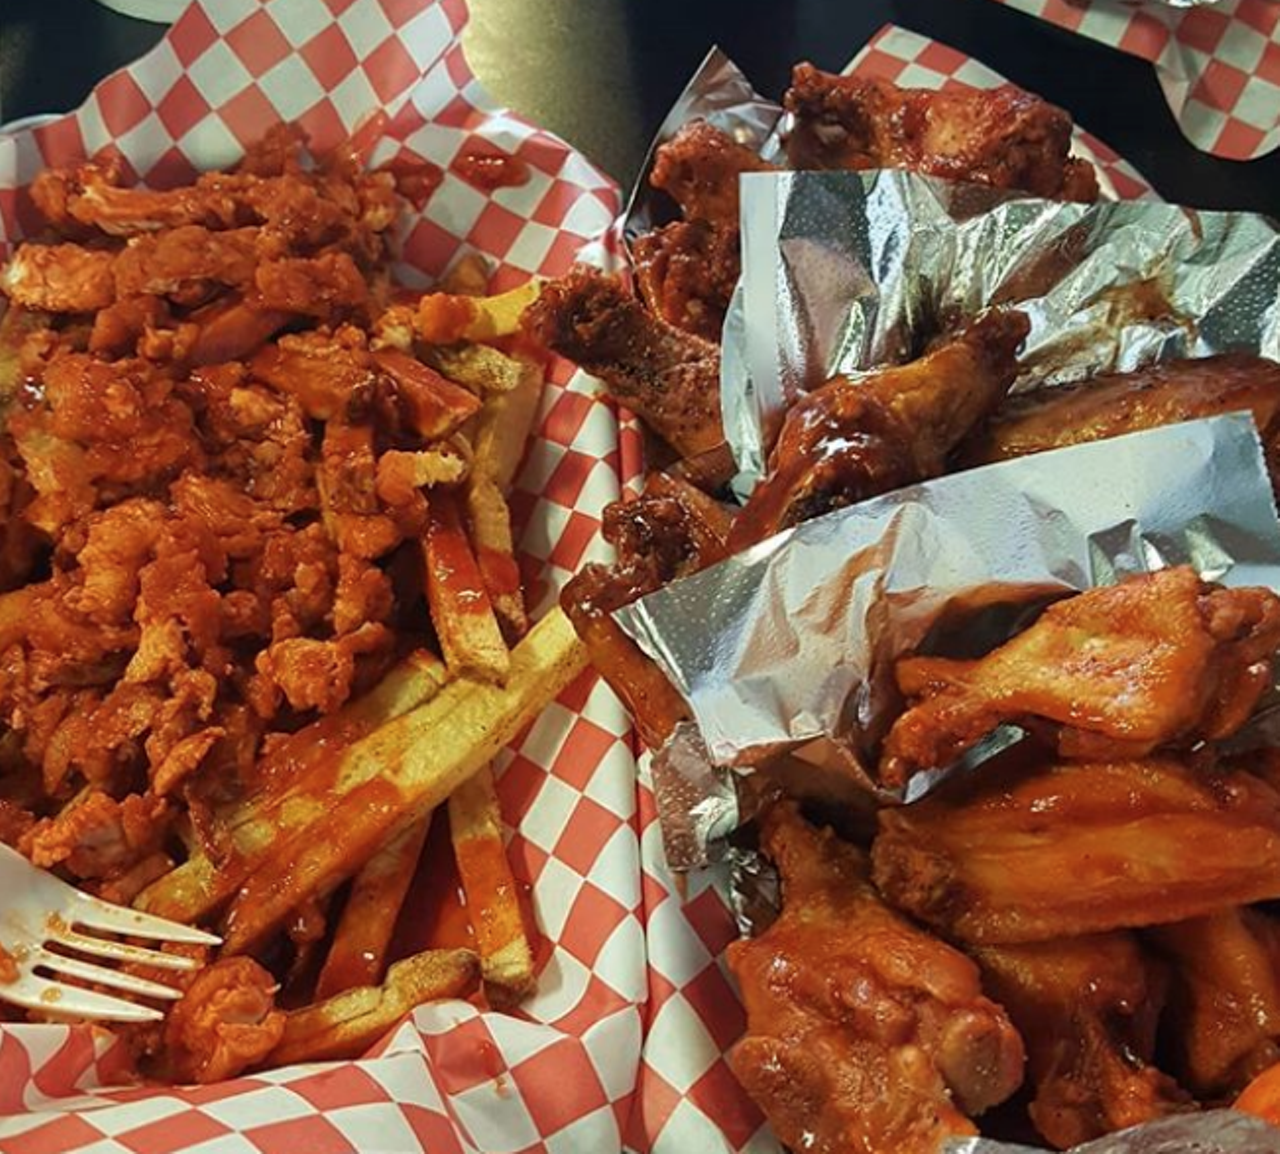 WingIt
5020 Old Seguin Road #8, (210) 900-3097, orderwingit.com
Get your fix with WingIt’s multitude of flavors, fried pickles and flavored chicken fries. You can trust you’ll be eating good here.
Photo via Instagram / dankwilliams210